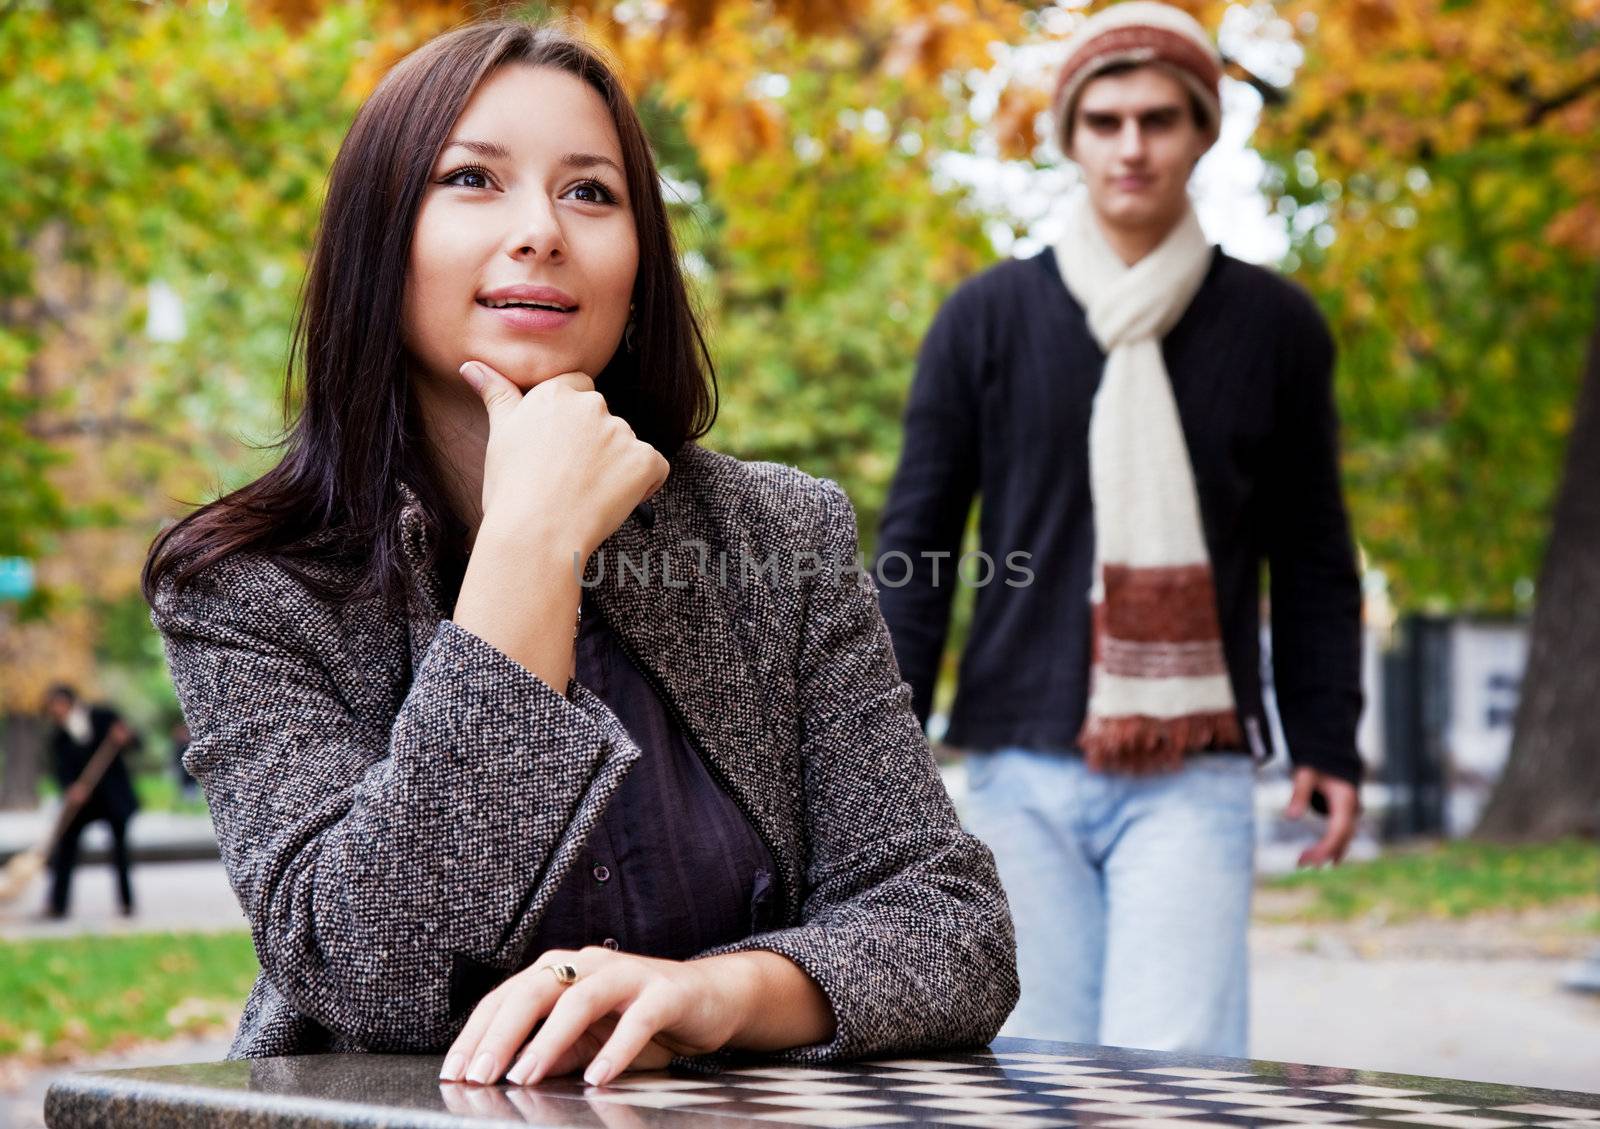 Young woman sitting in park, male coming from behind